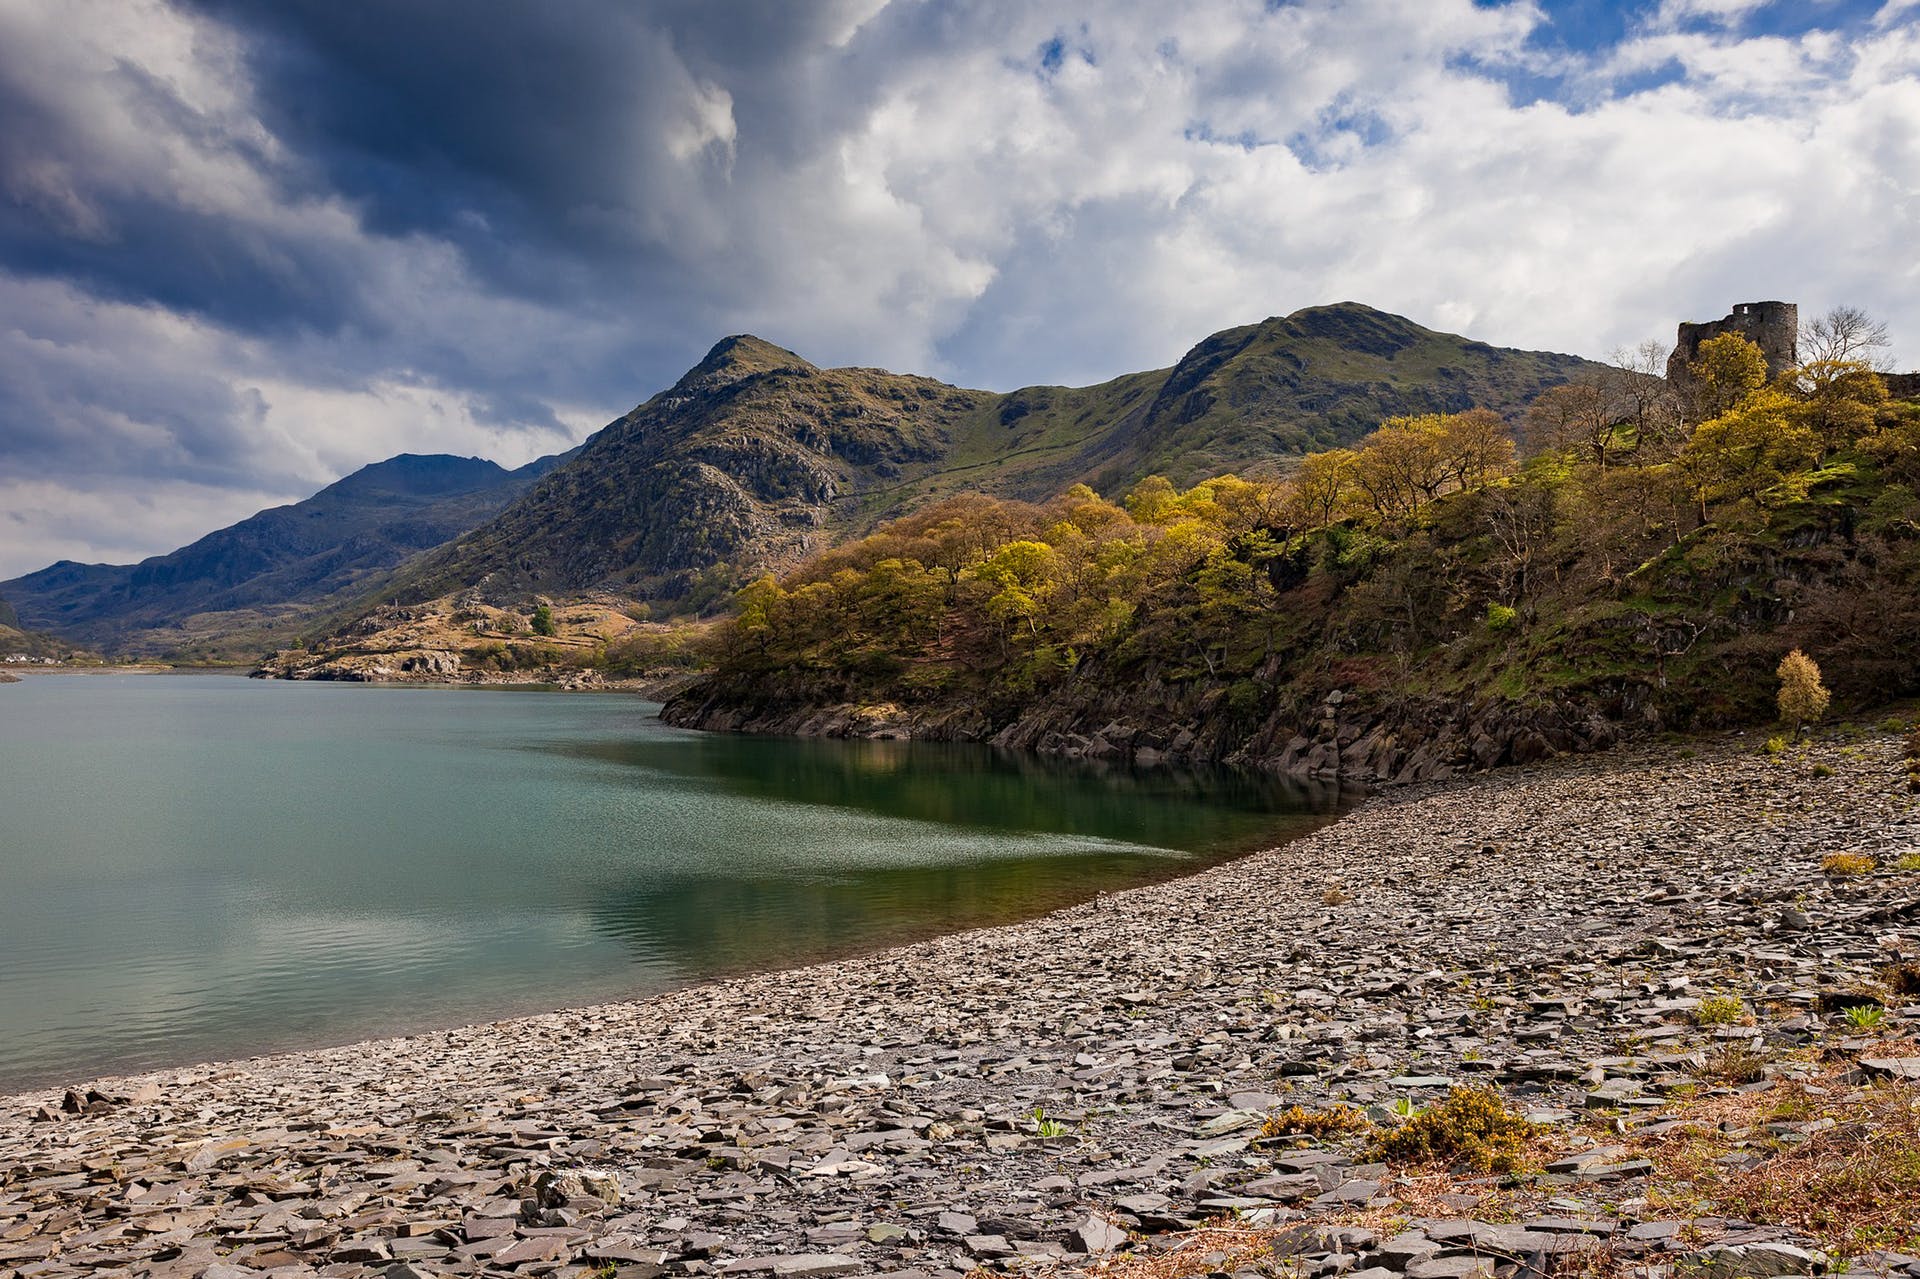 The best hikes in the UK include everything from rocky beaches and lakes to mountain summits.